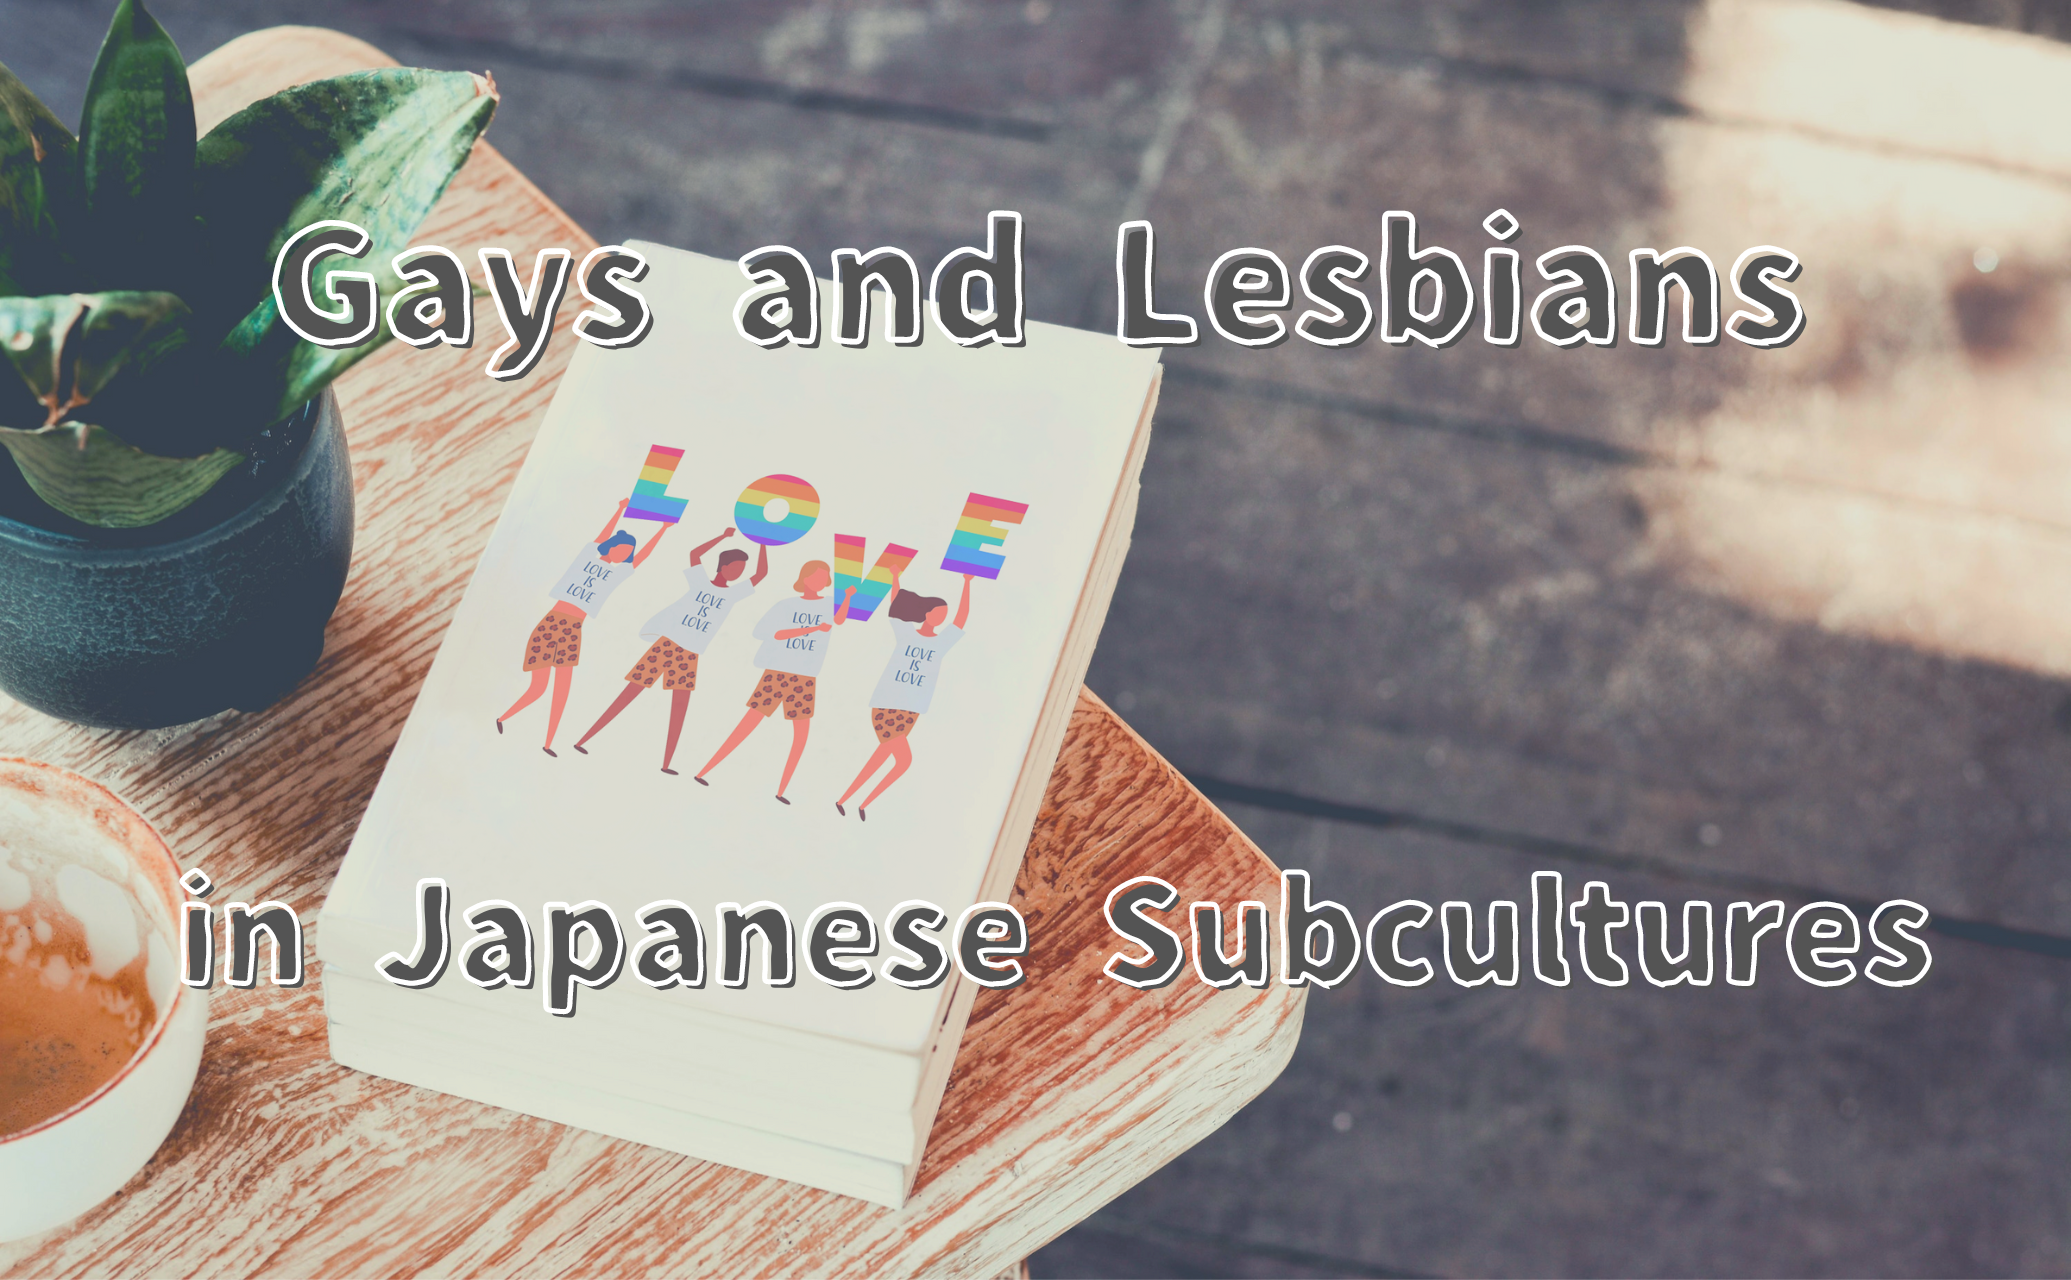 gays and lesbians in Japanese subculture